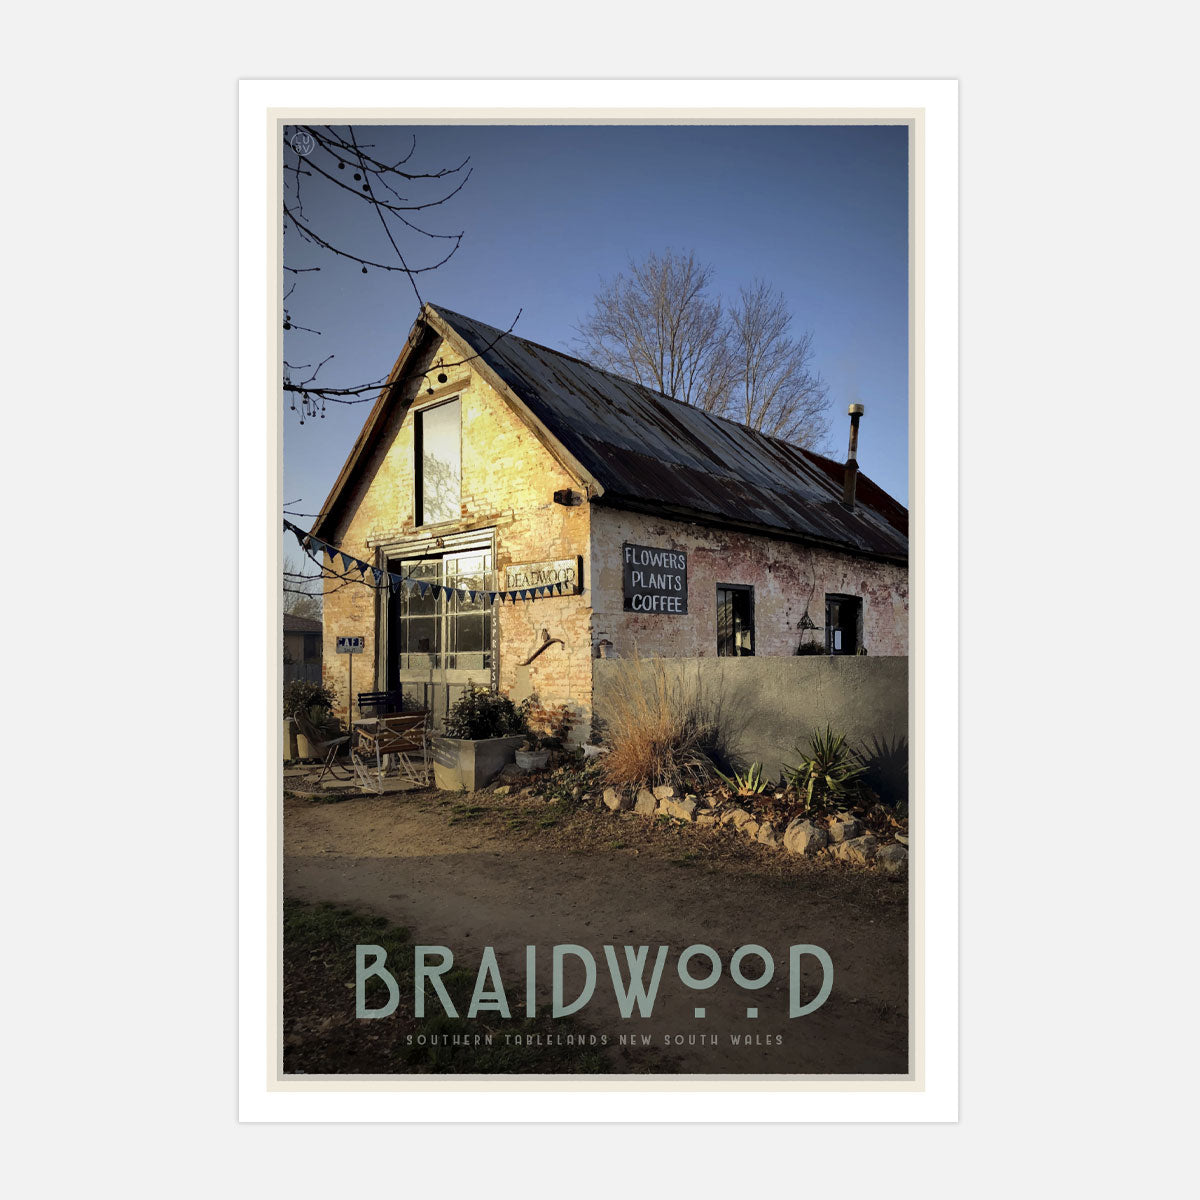 Braidwood cafe vintage travel style poster. Original design by Places We Luv